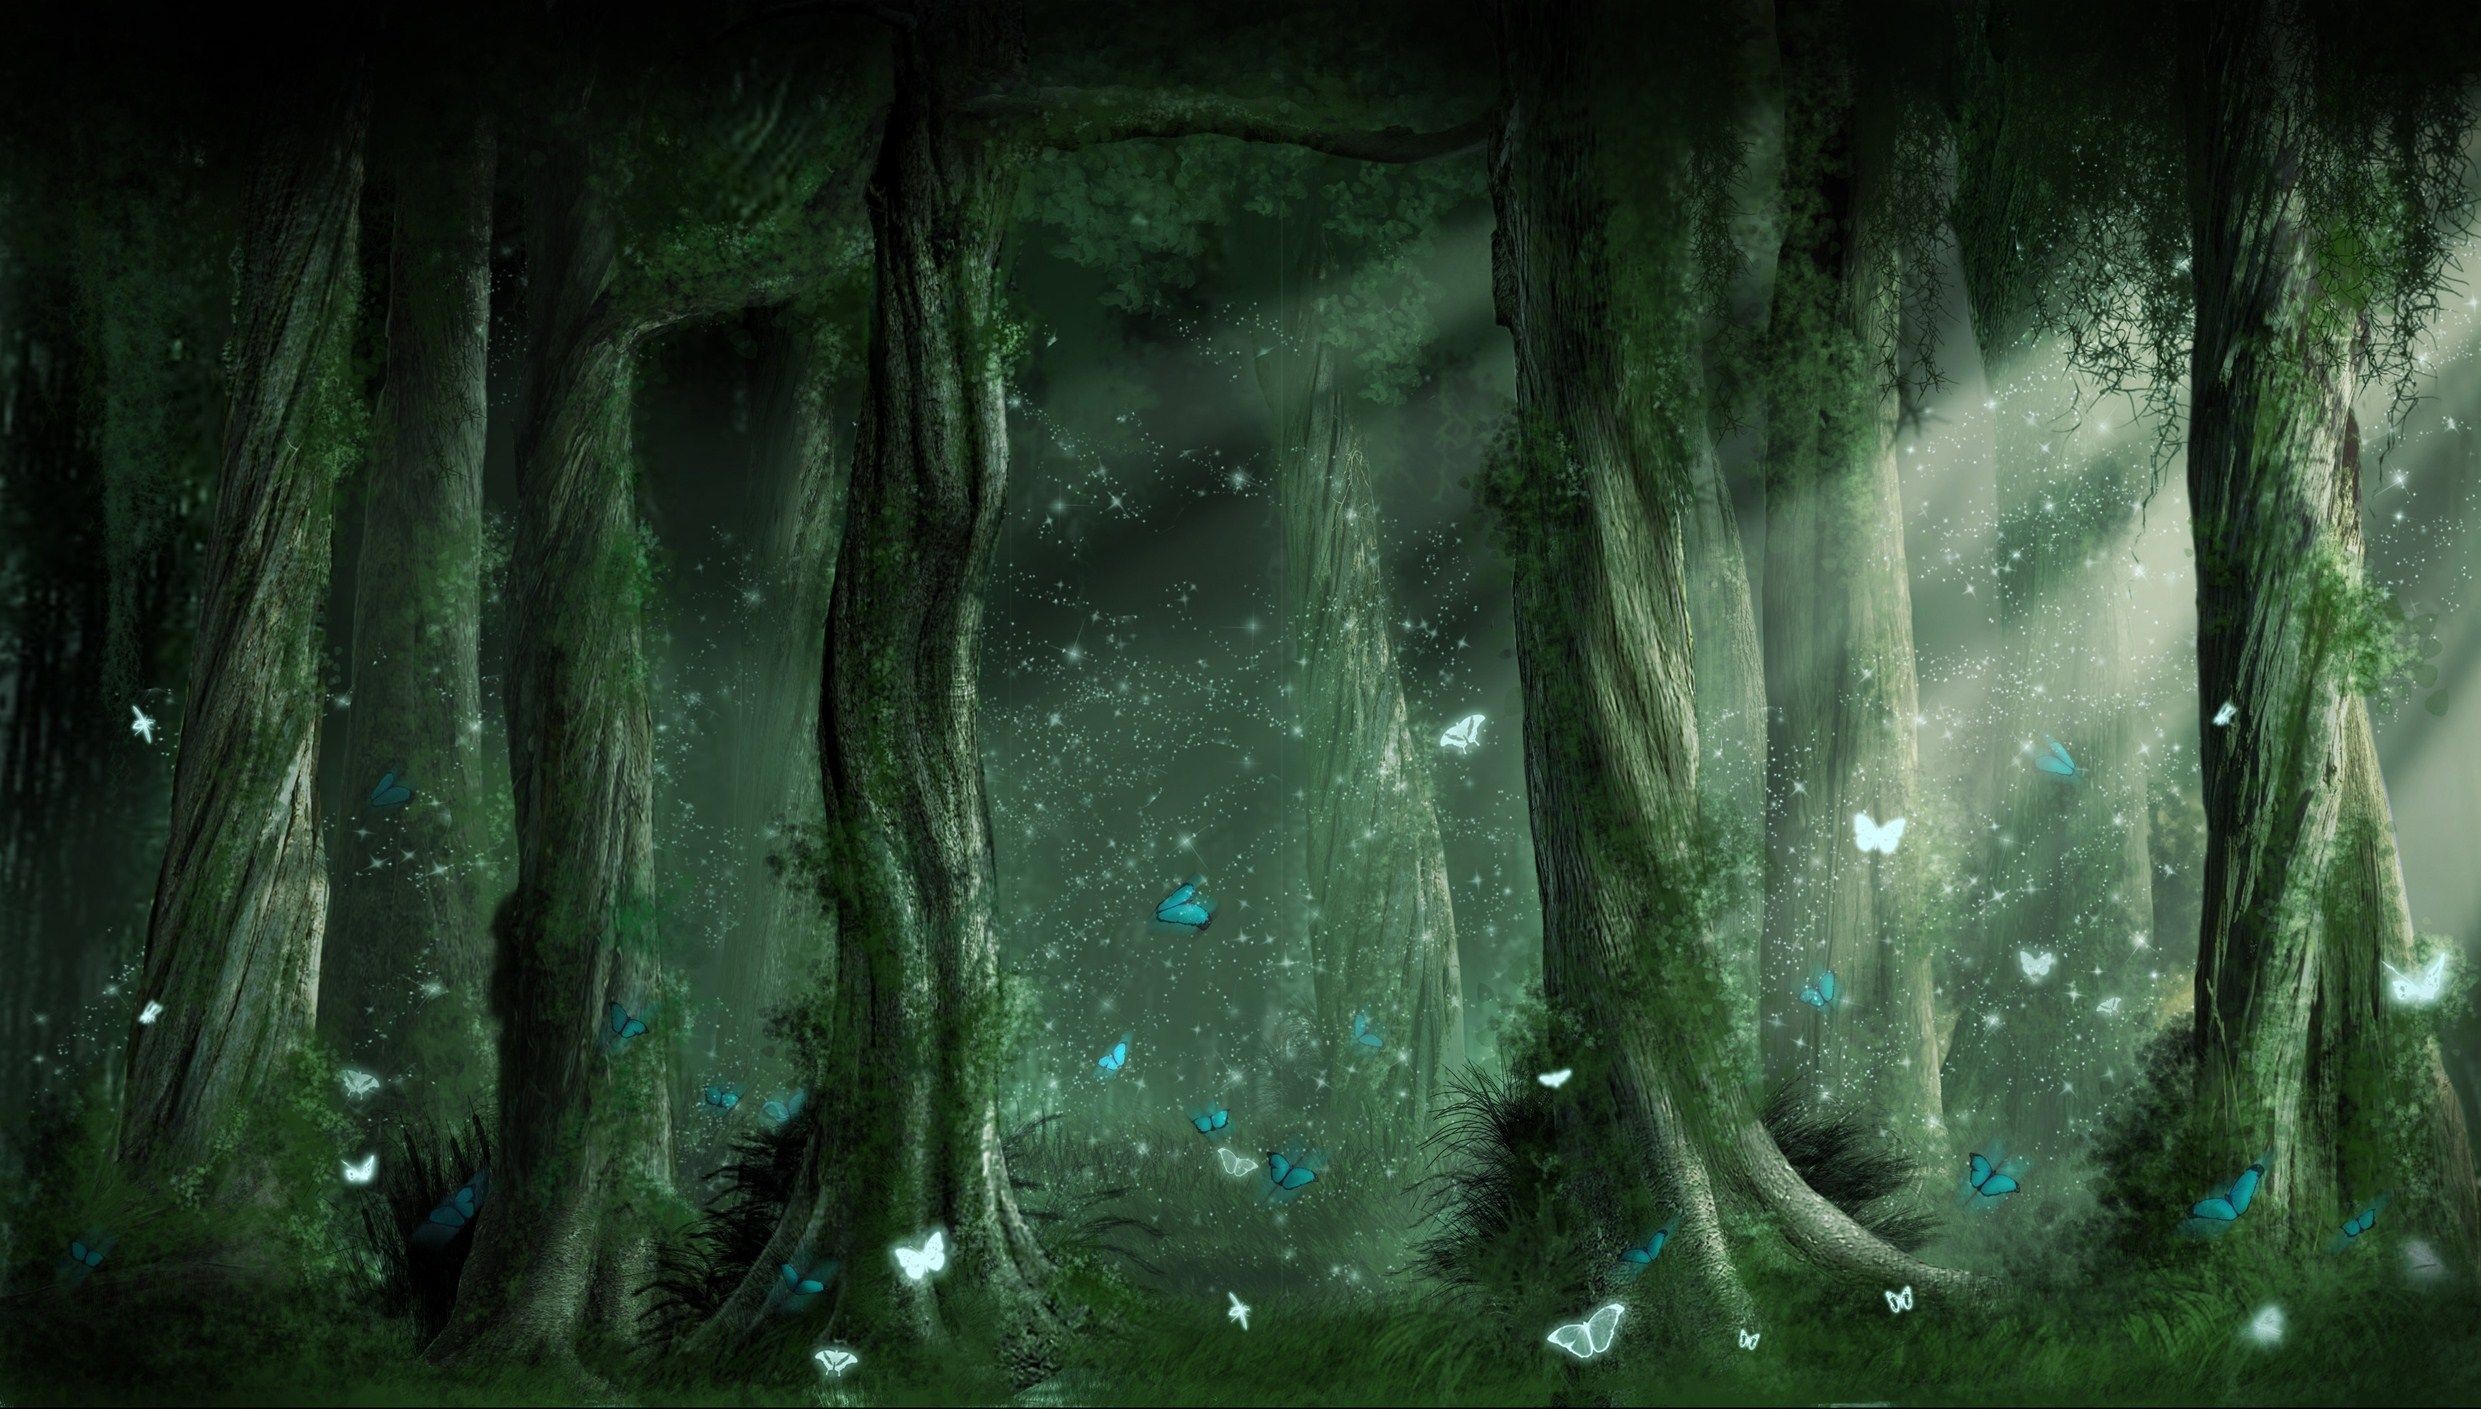 2481x1409 Hd Fantasy Forest Wallpaper 24650 Hd Wallpapers